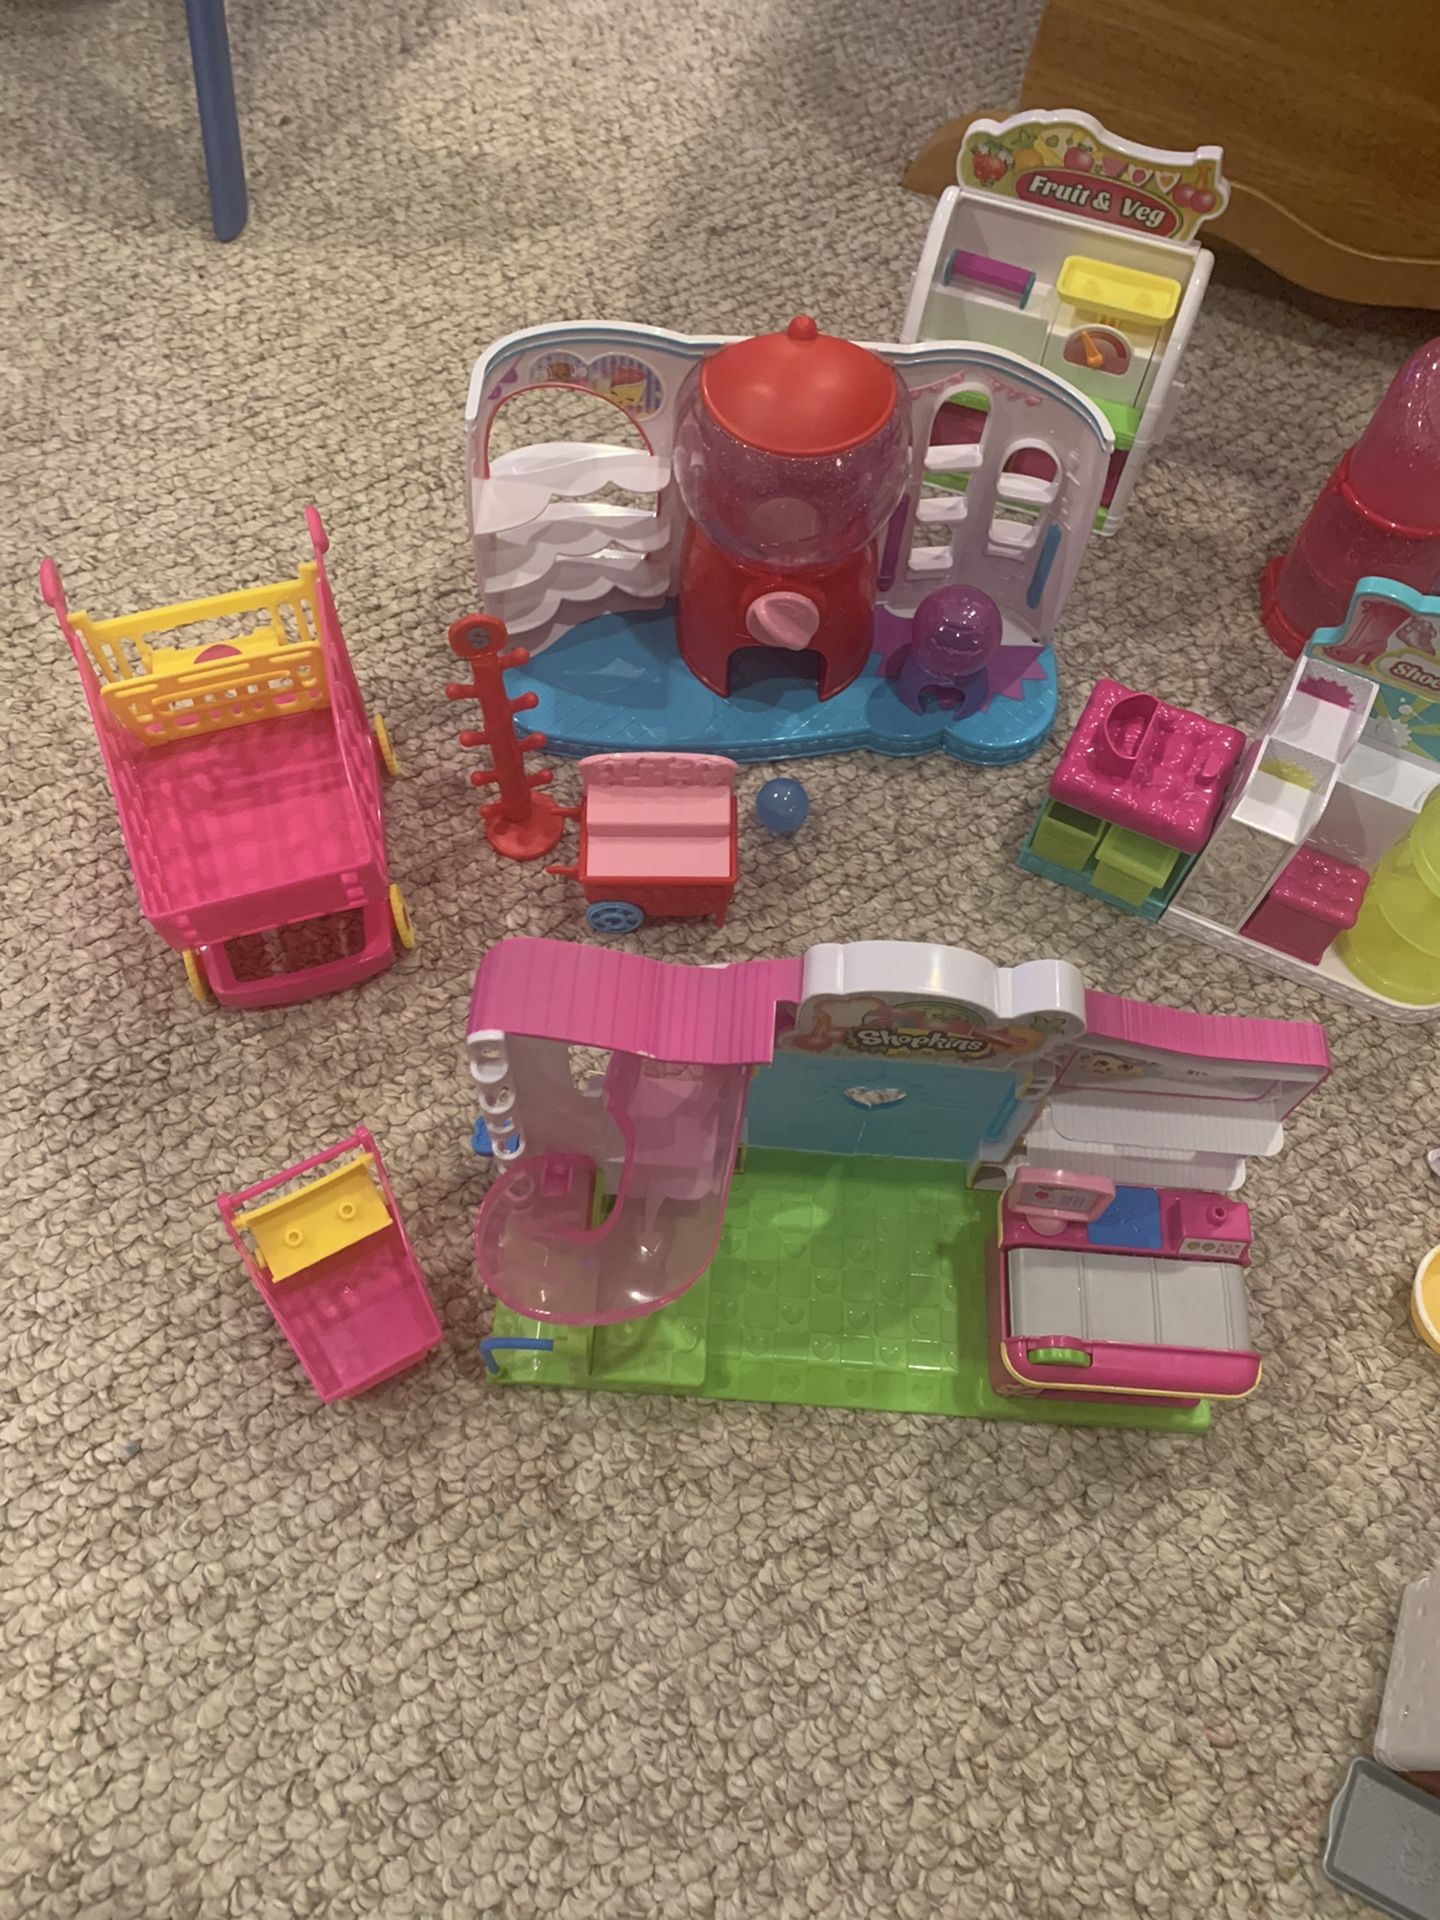 Shopkins happy places play sets with some figures